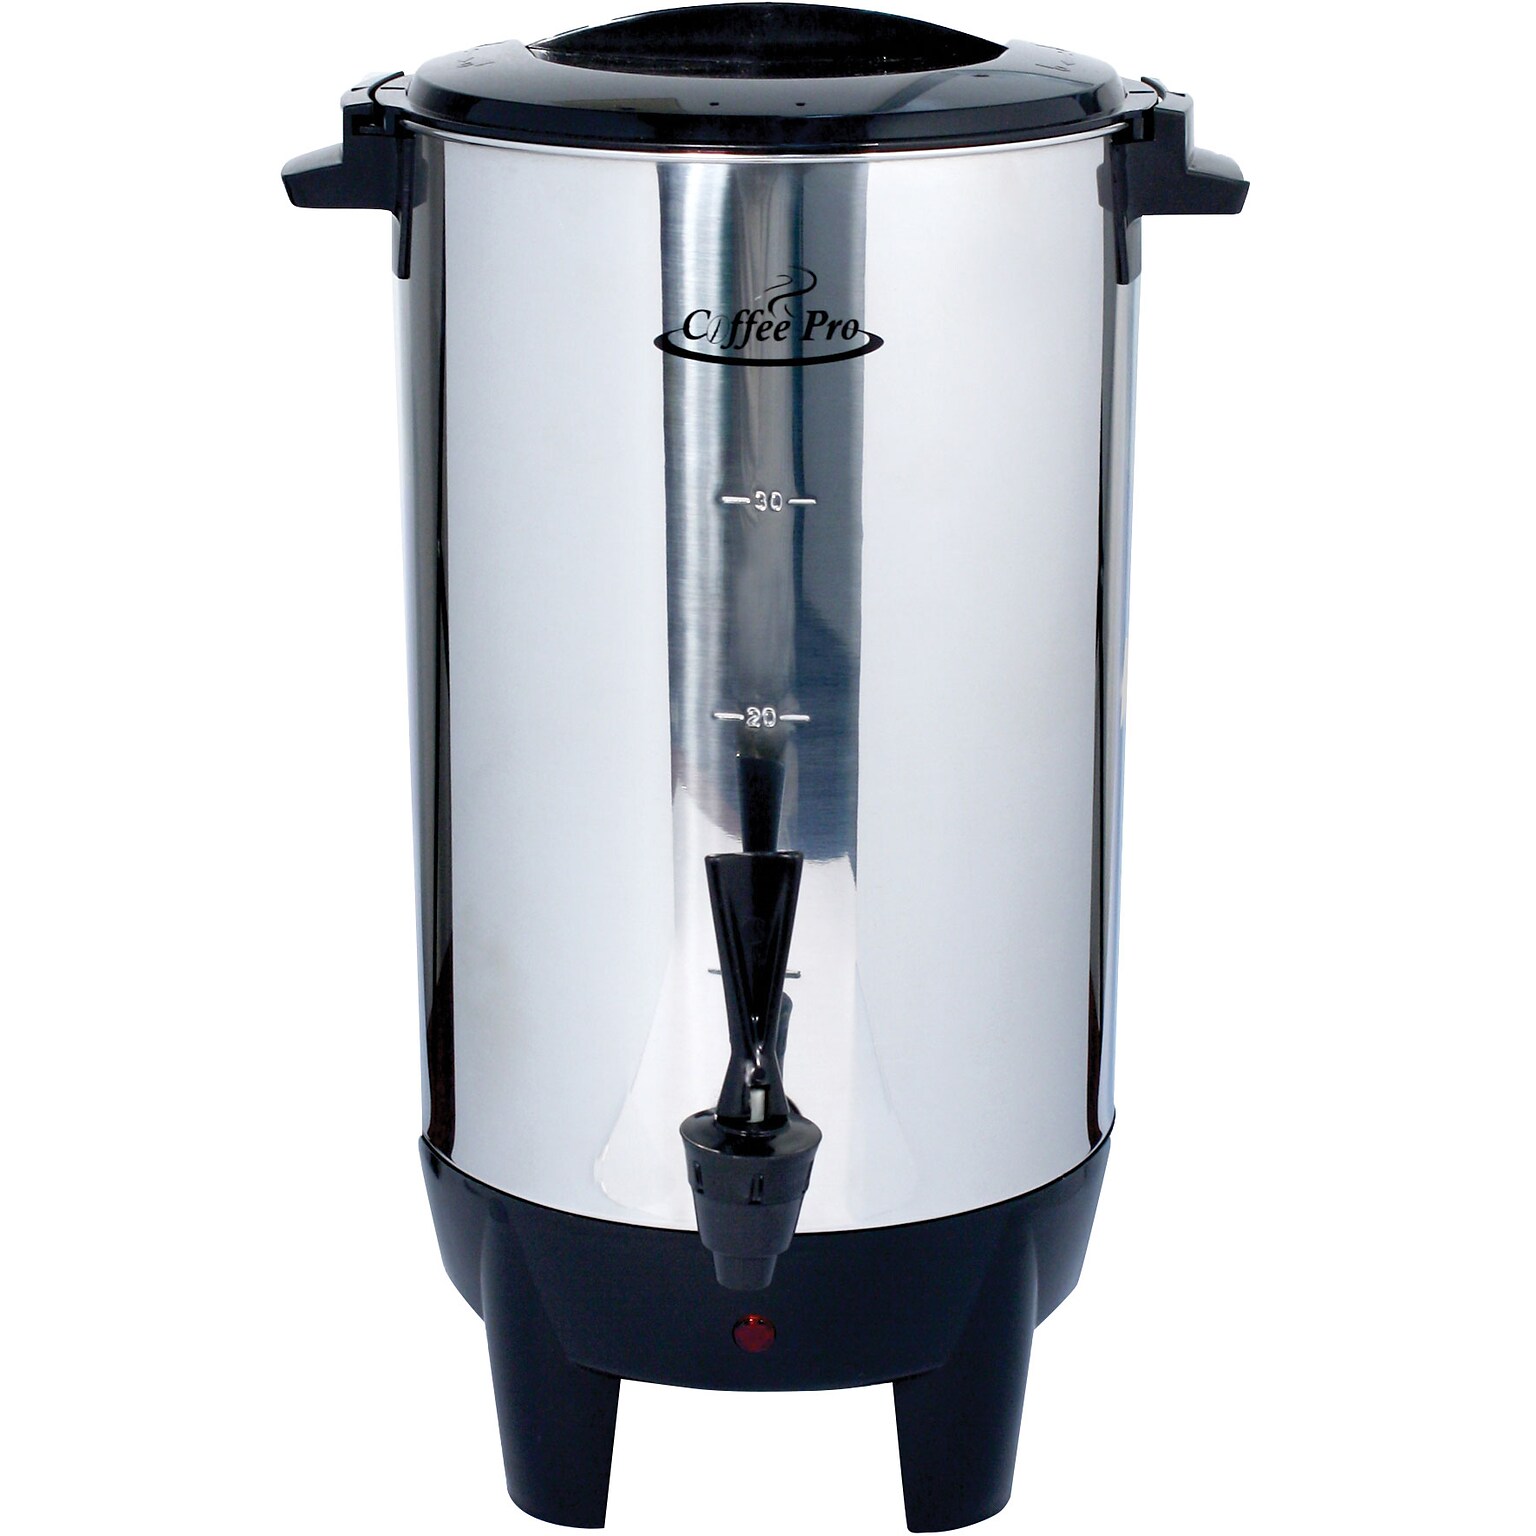 Coffee Pro® Home/Business 30 Cup Single Wall Percolating Urn (CP30)